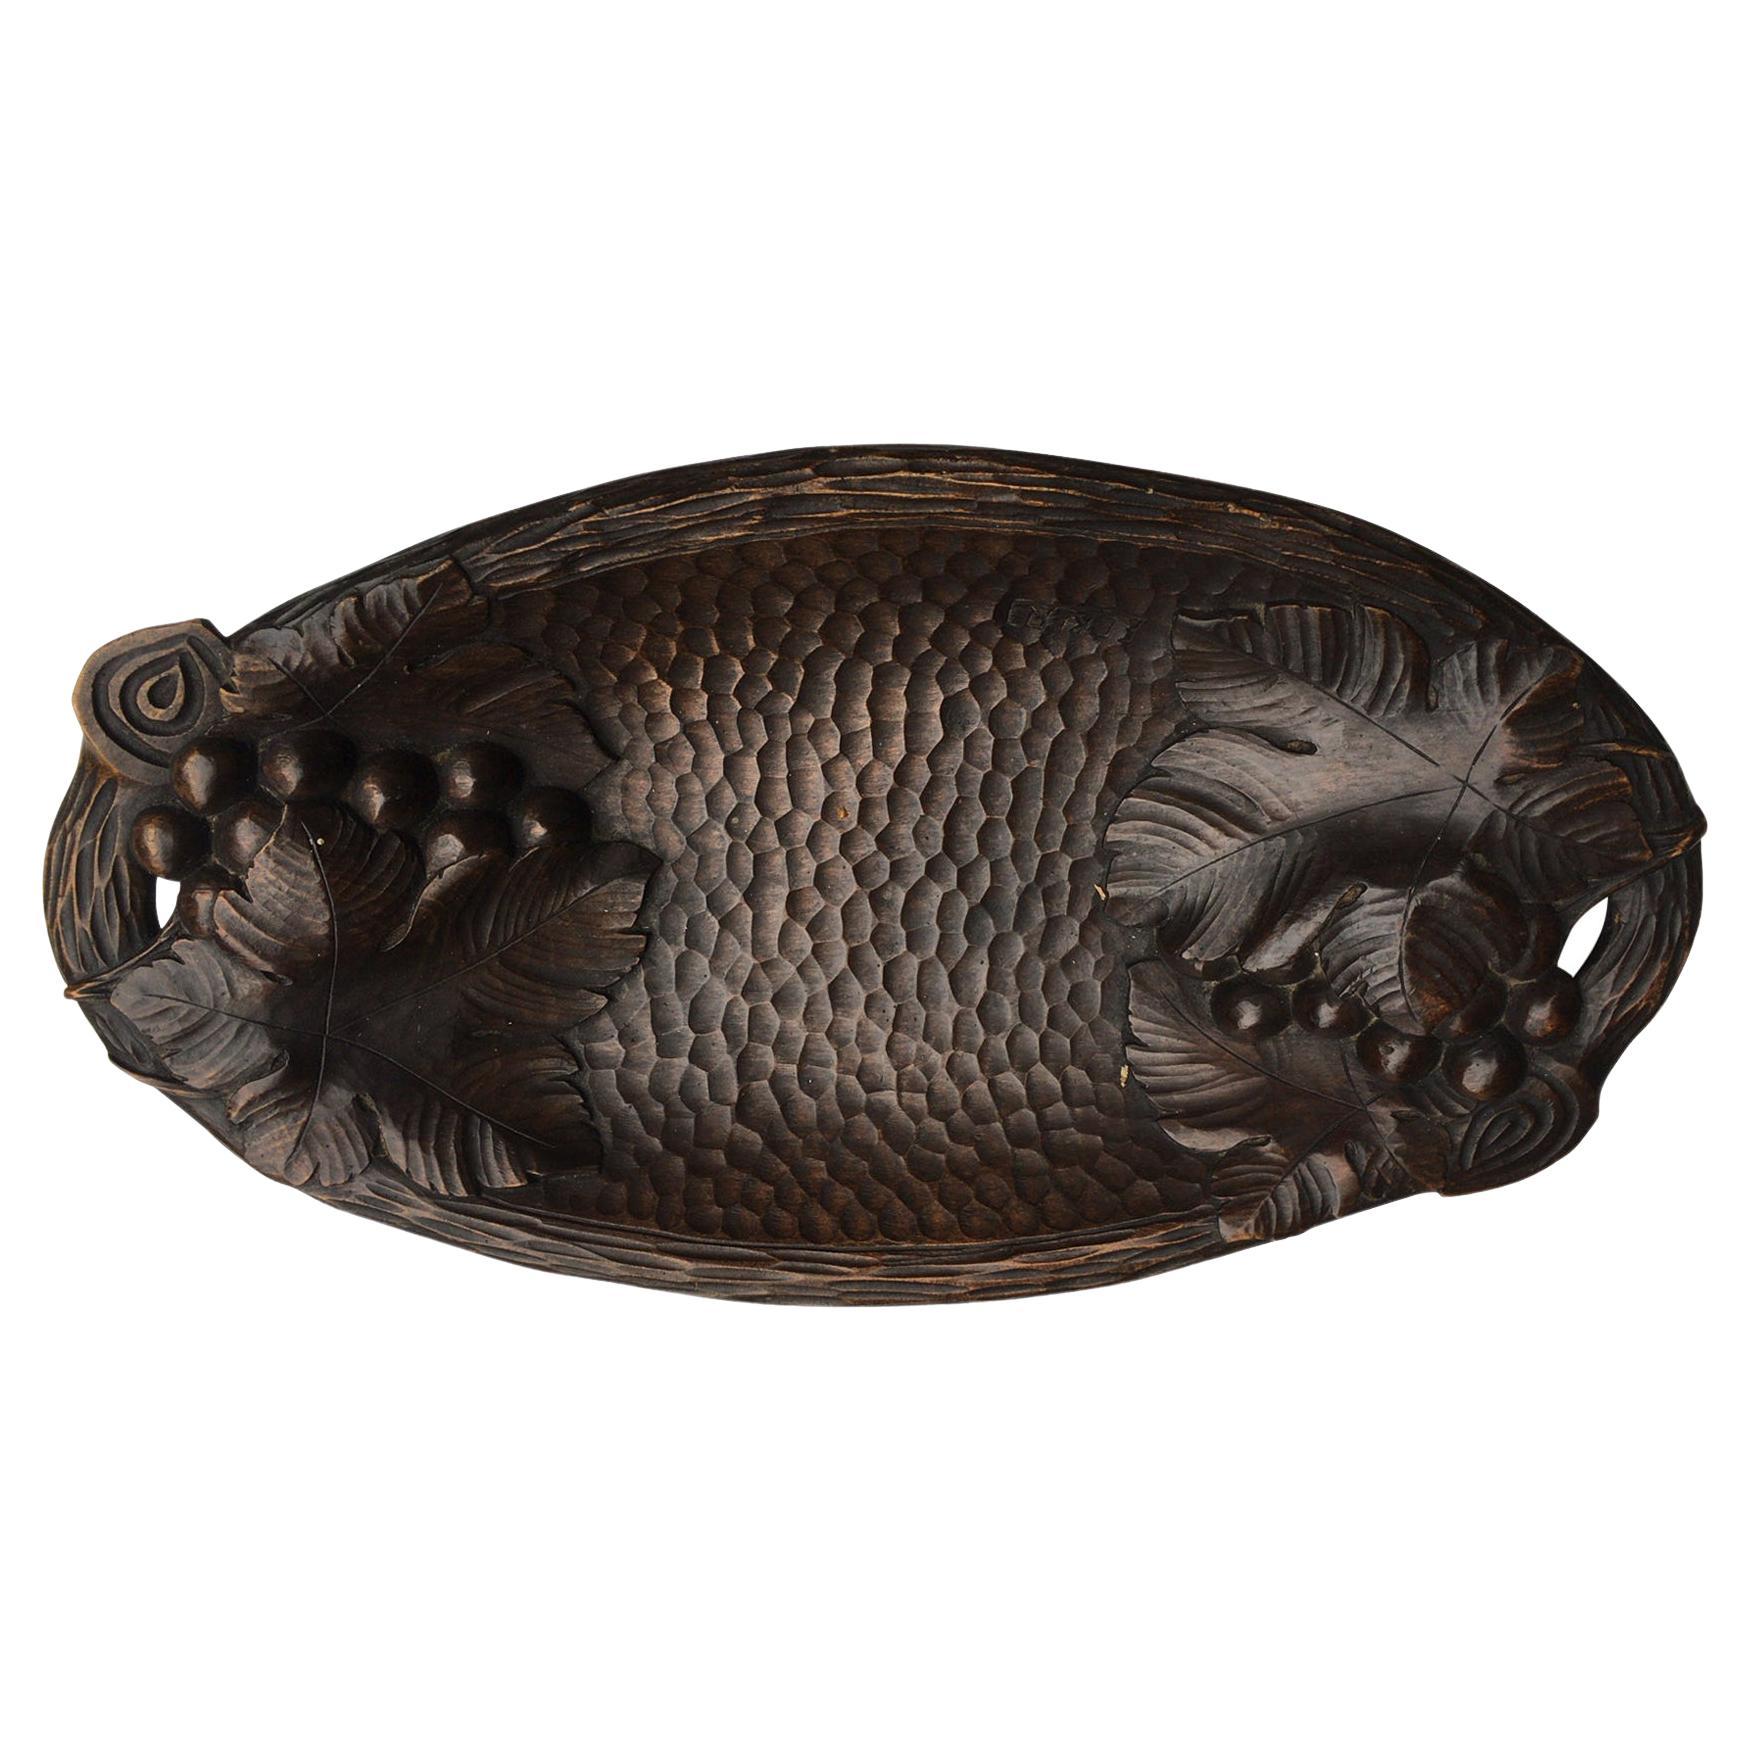 French Carved Wood Platter with Grapes and Vine Leaves, circa 1900